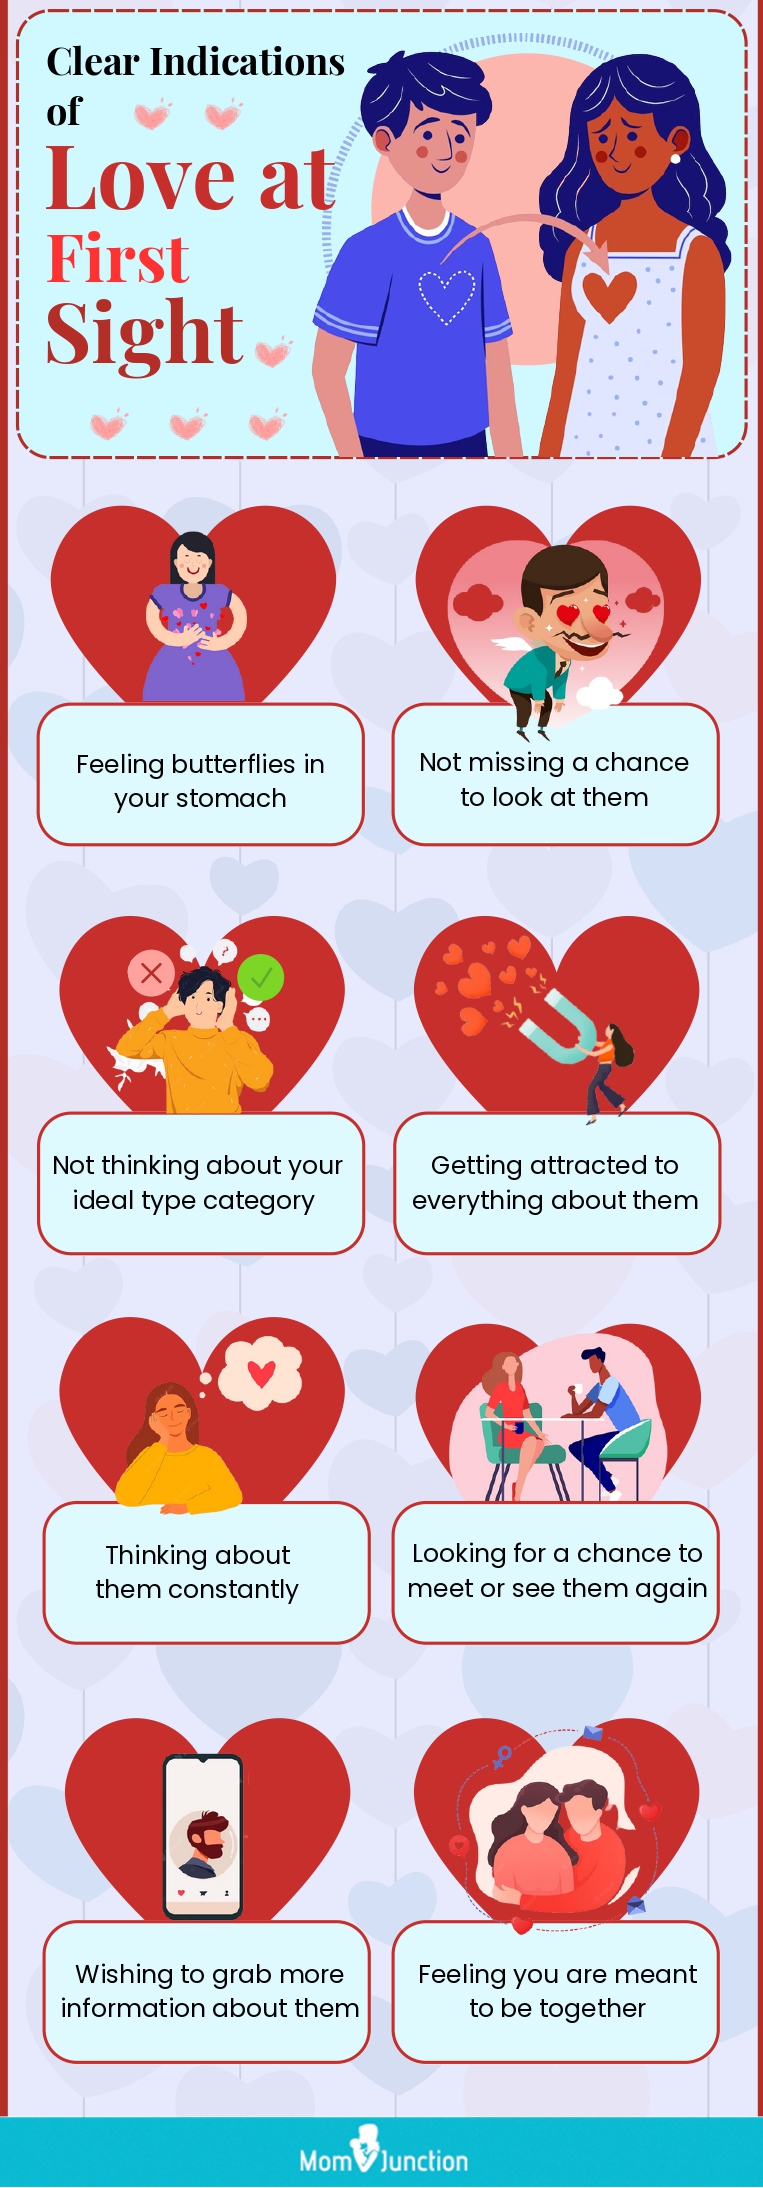 clear indications of love at first sight (infographic)